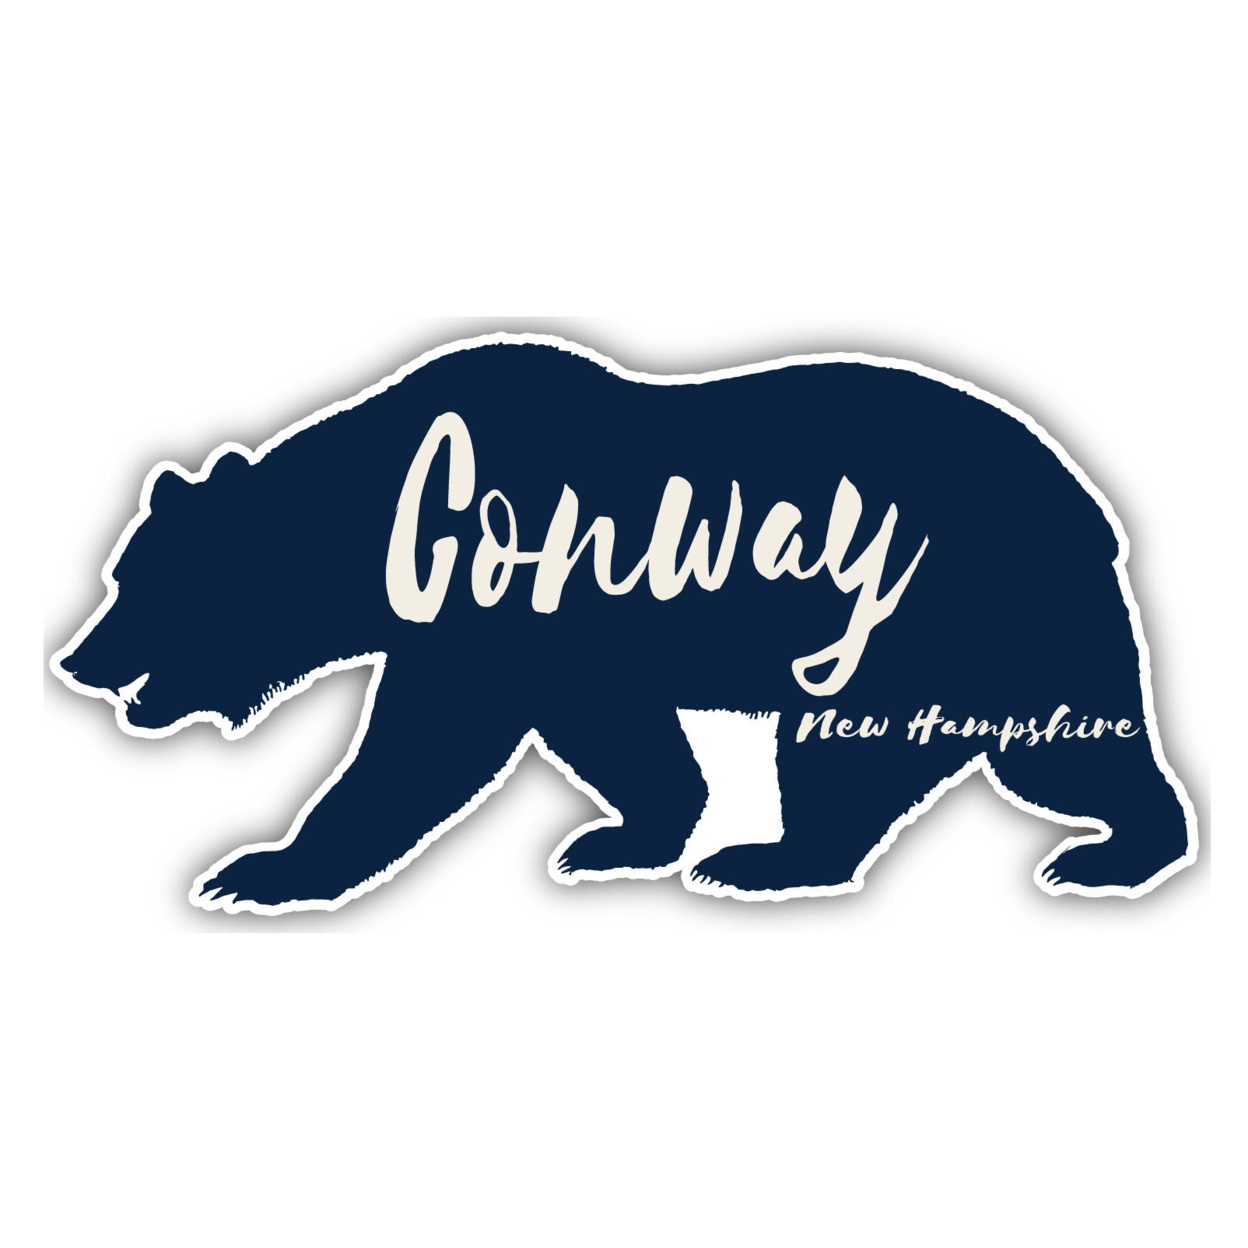 Conway New Hampshire Souvenir Decorative Stickers (Choose Theme And Size) - 4-Pack, 2-Inch, Bear